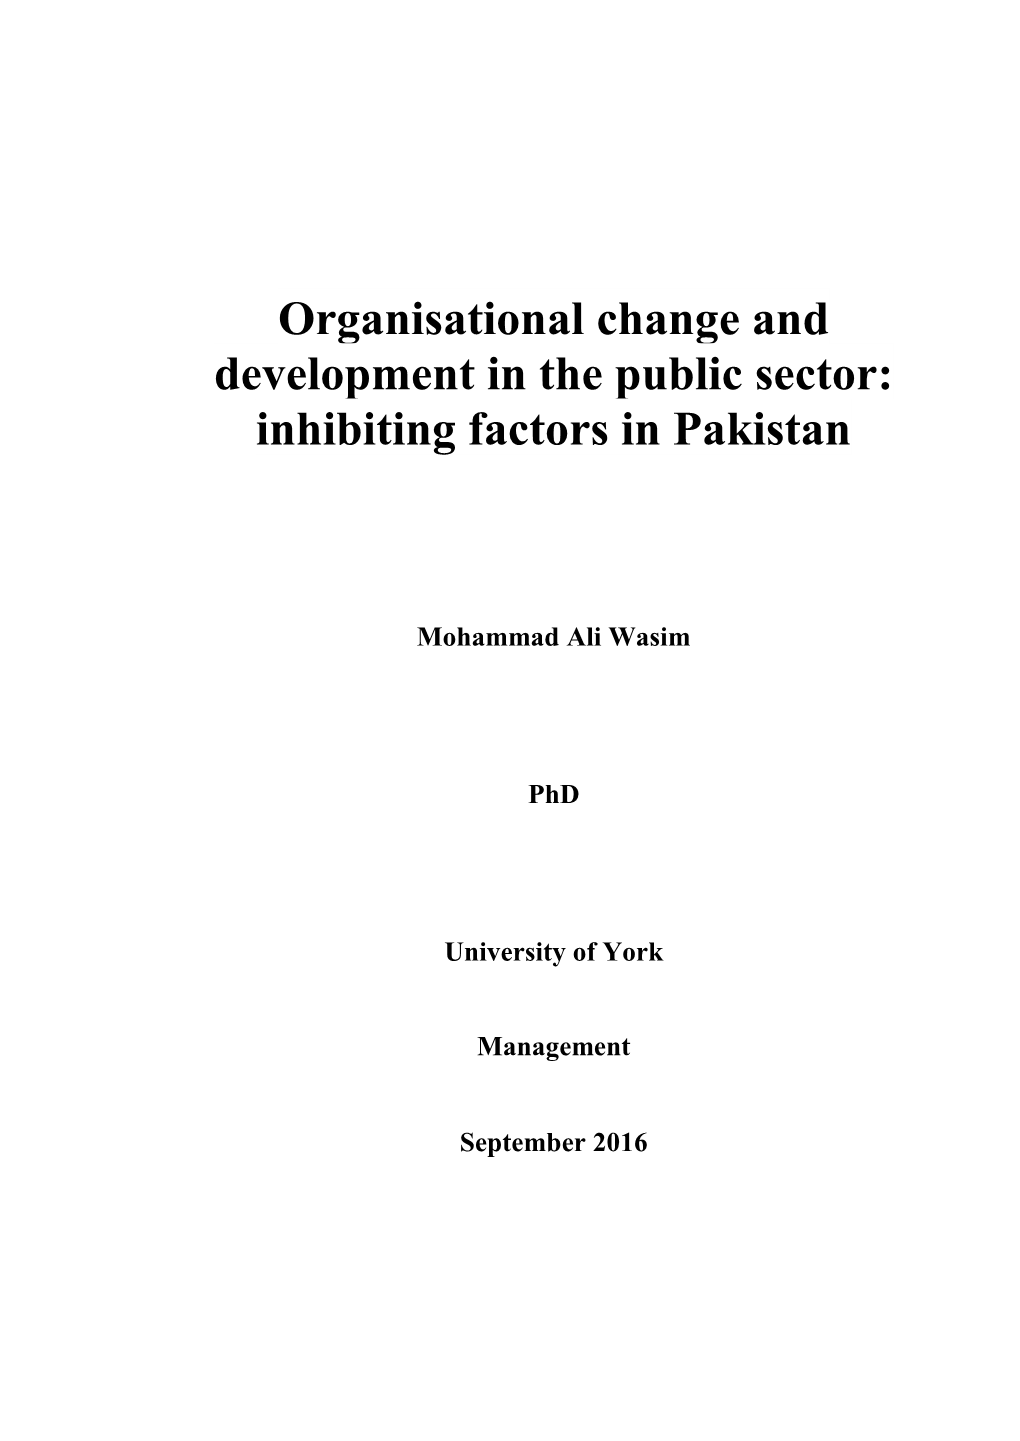 Organisational Change and Development in the Public Sector: Inhibiting Factors in Pakistan